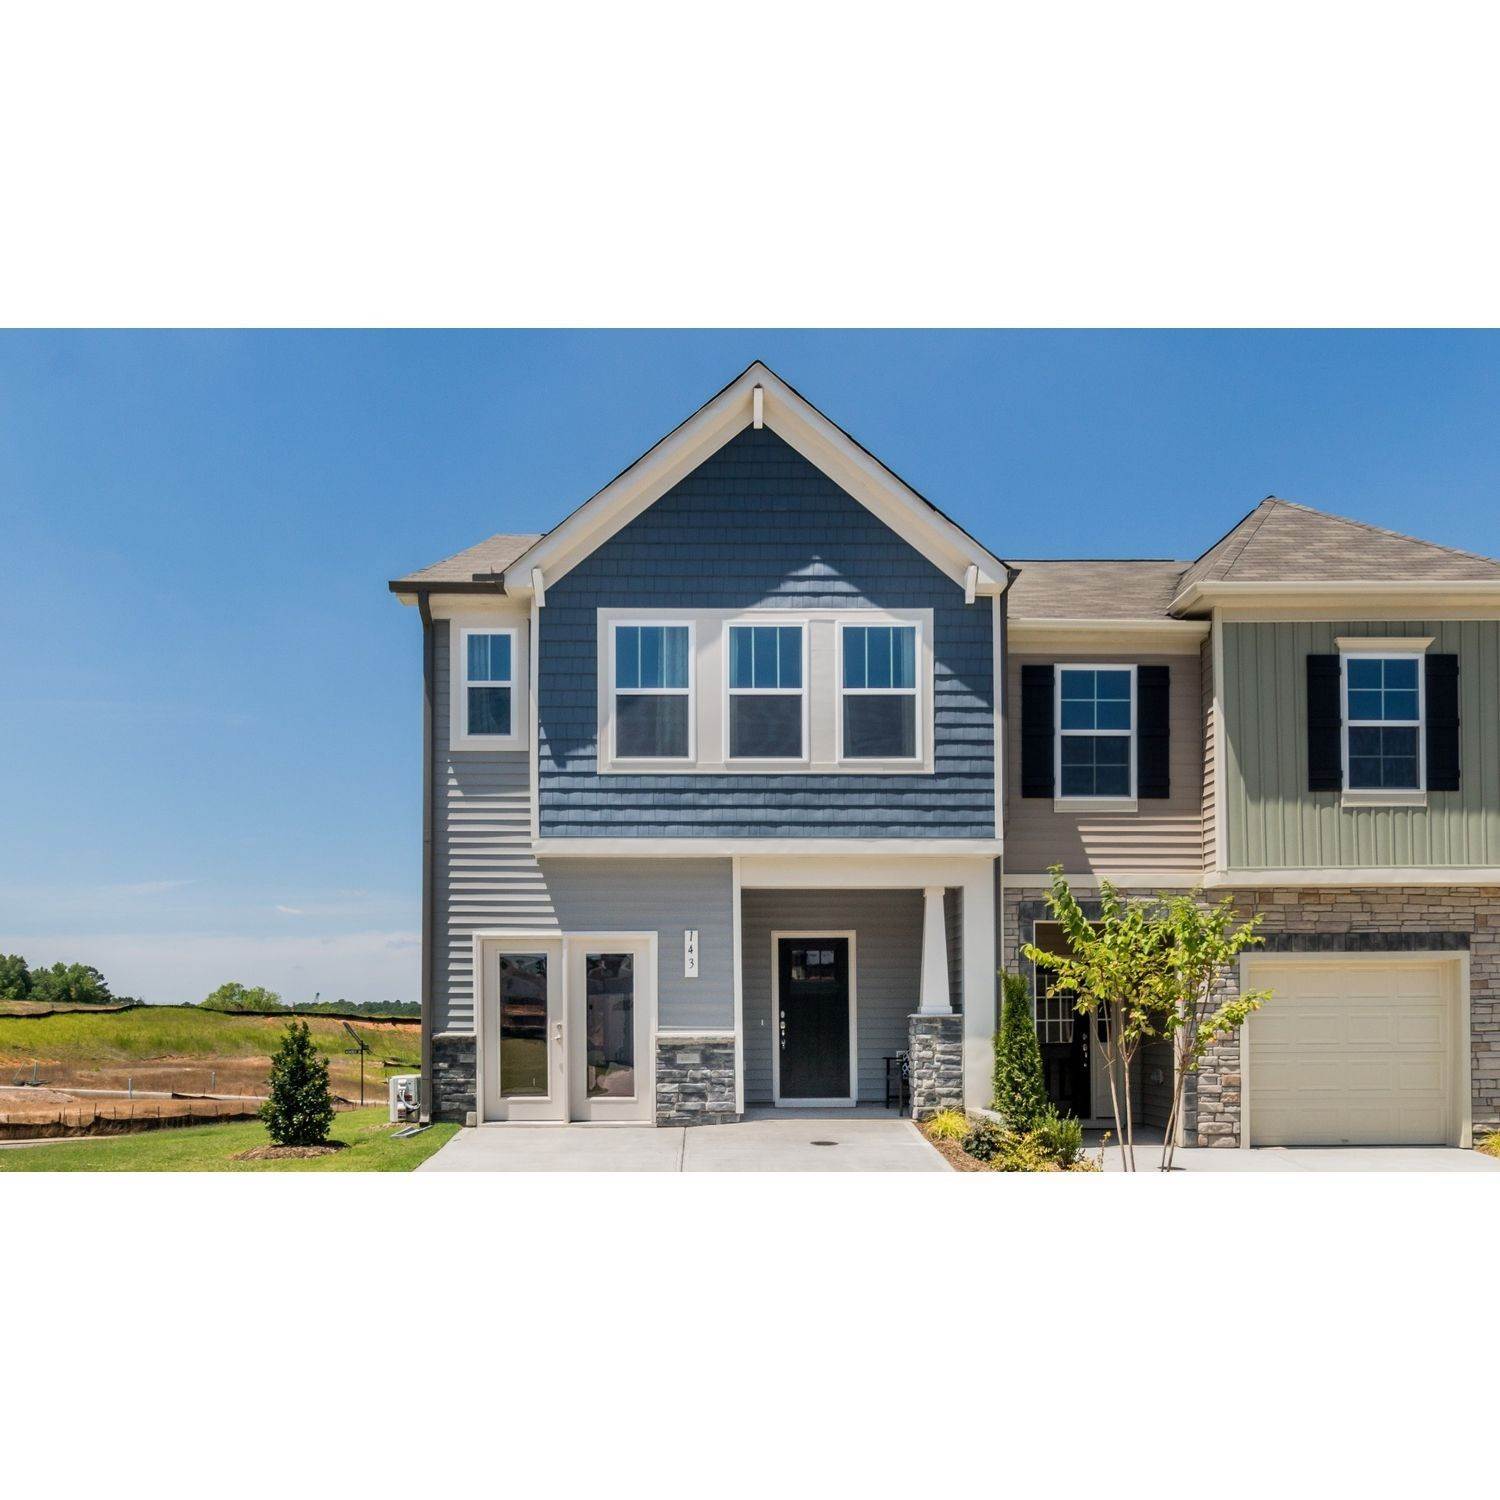 Spring Village Townhomes building at 1133 Chalybeate Springs Road, Angier, NC 27501